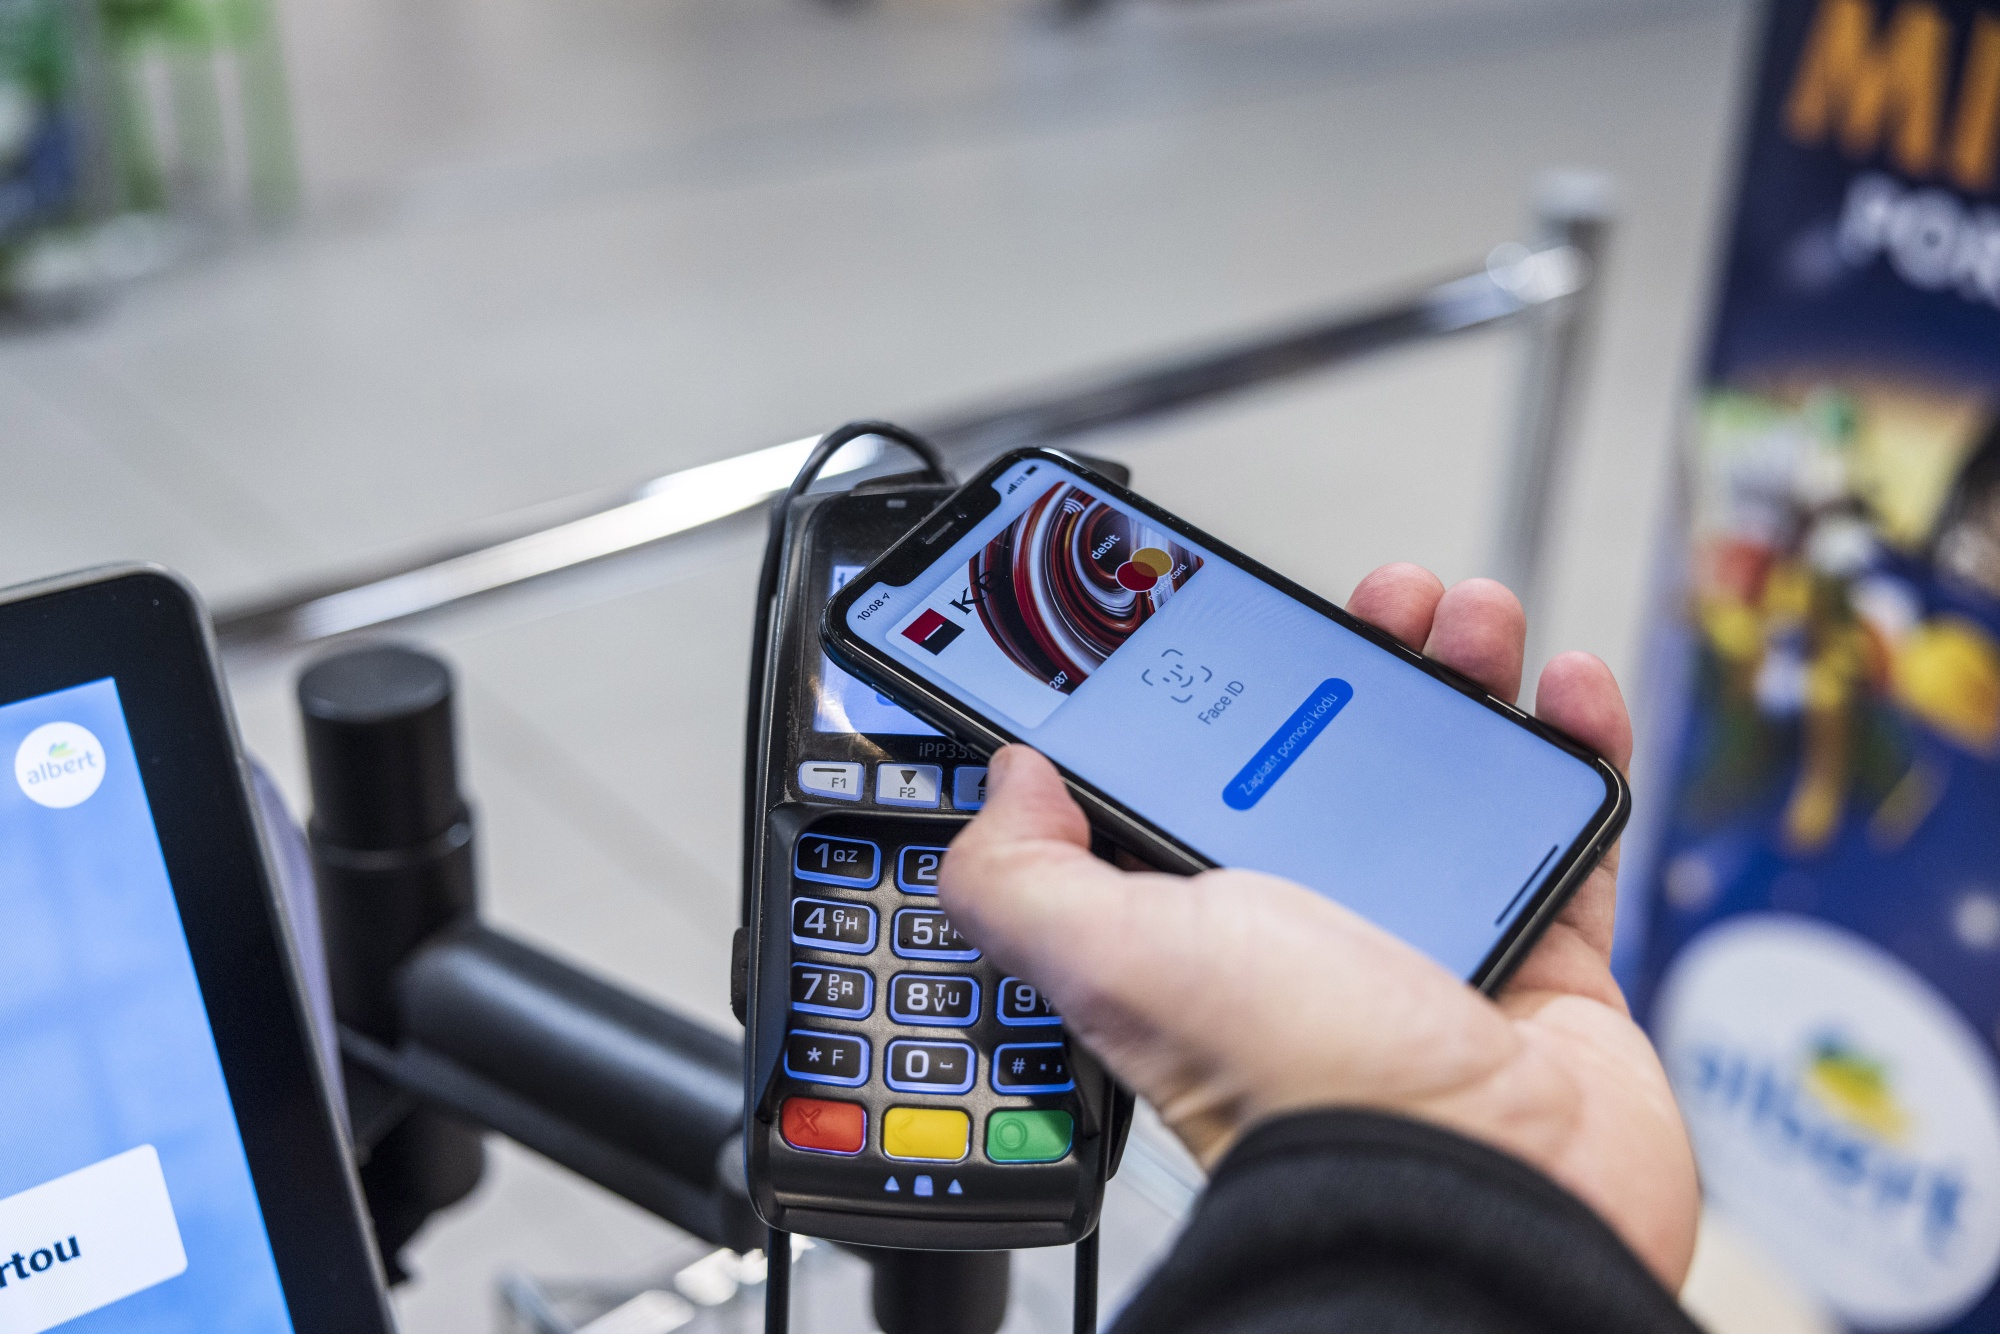 Can Third-Party Banks and Use Bloomberg for Apple Apps iPhone Tap-to-Pay? - NFC (AAPL)